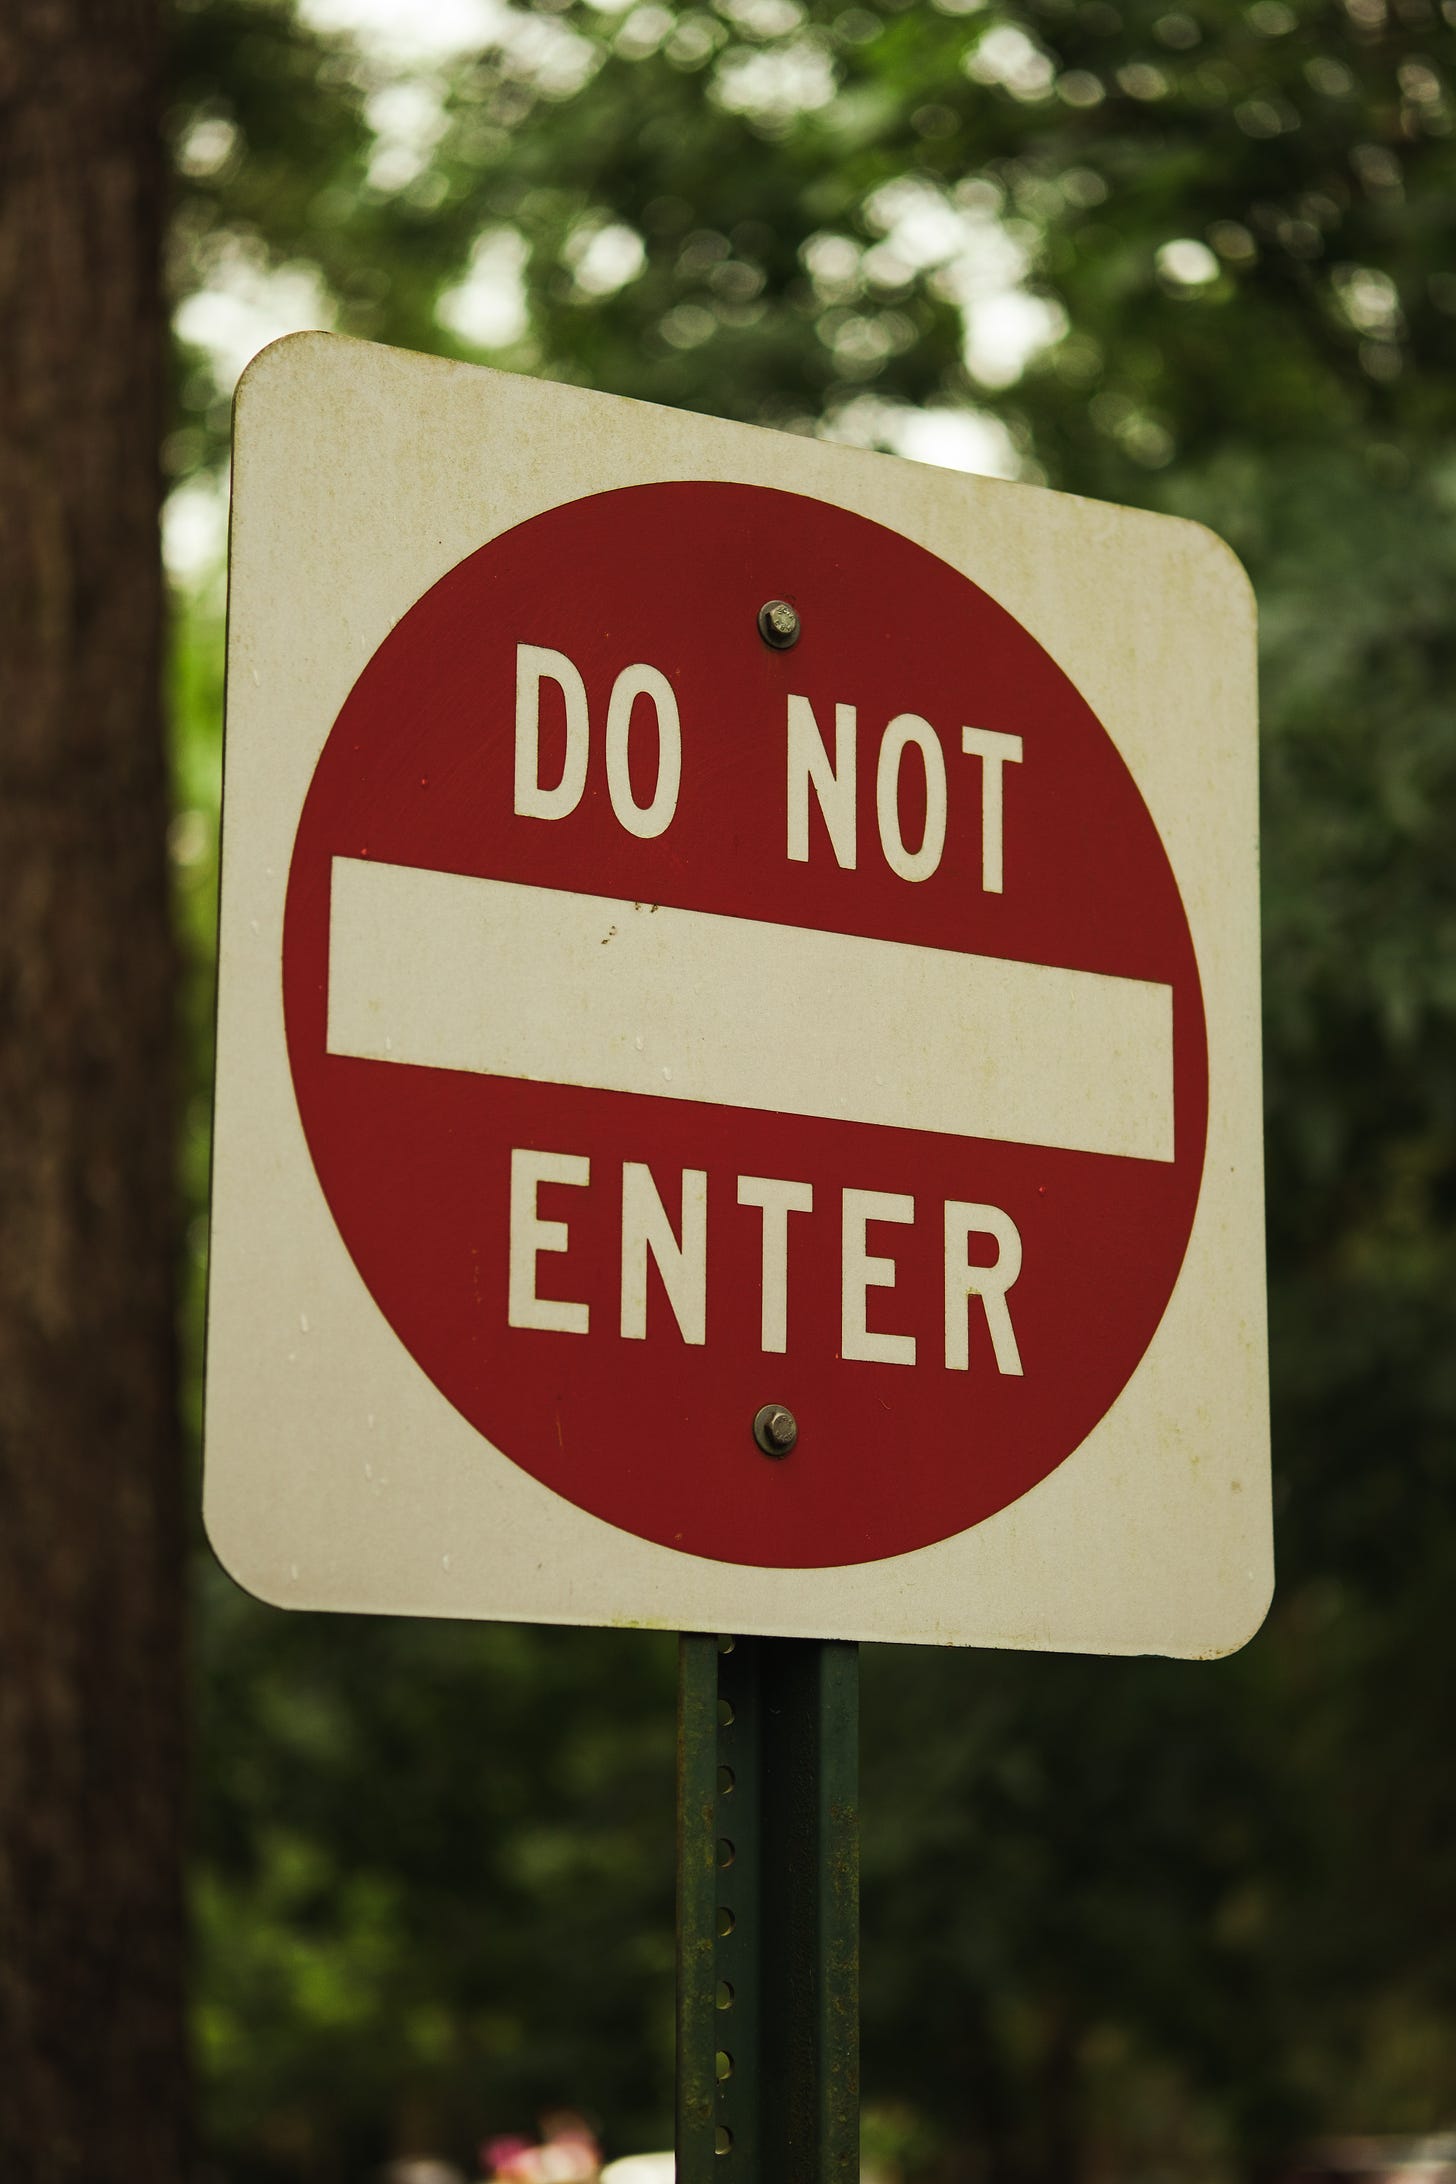 A "Do Not Enter" sign against a background of trees